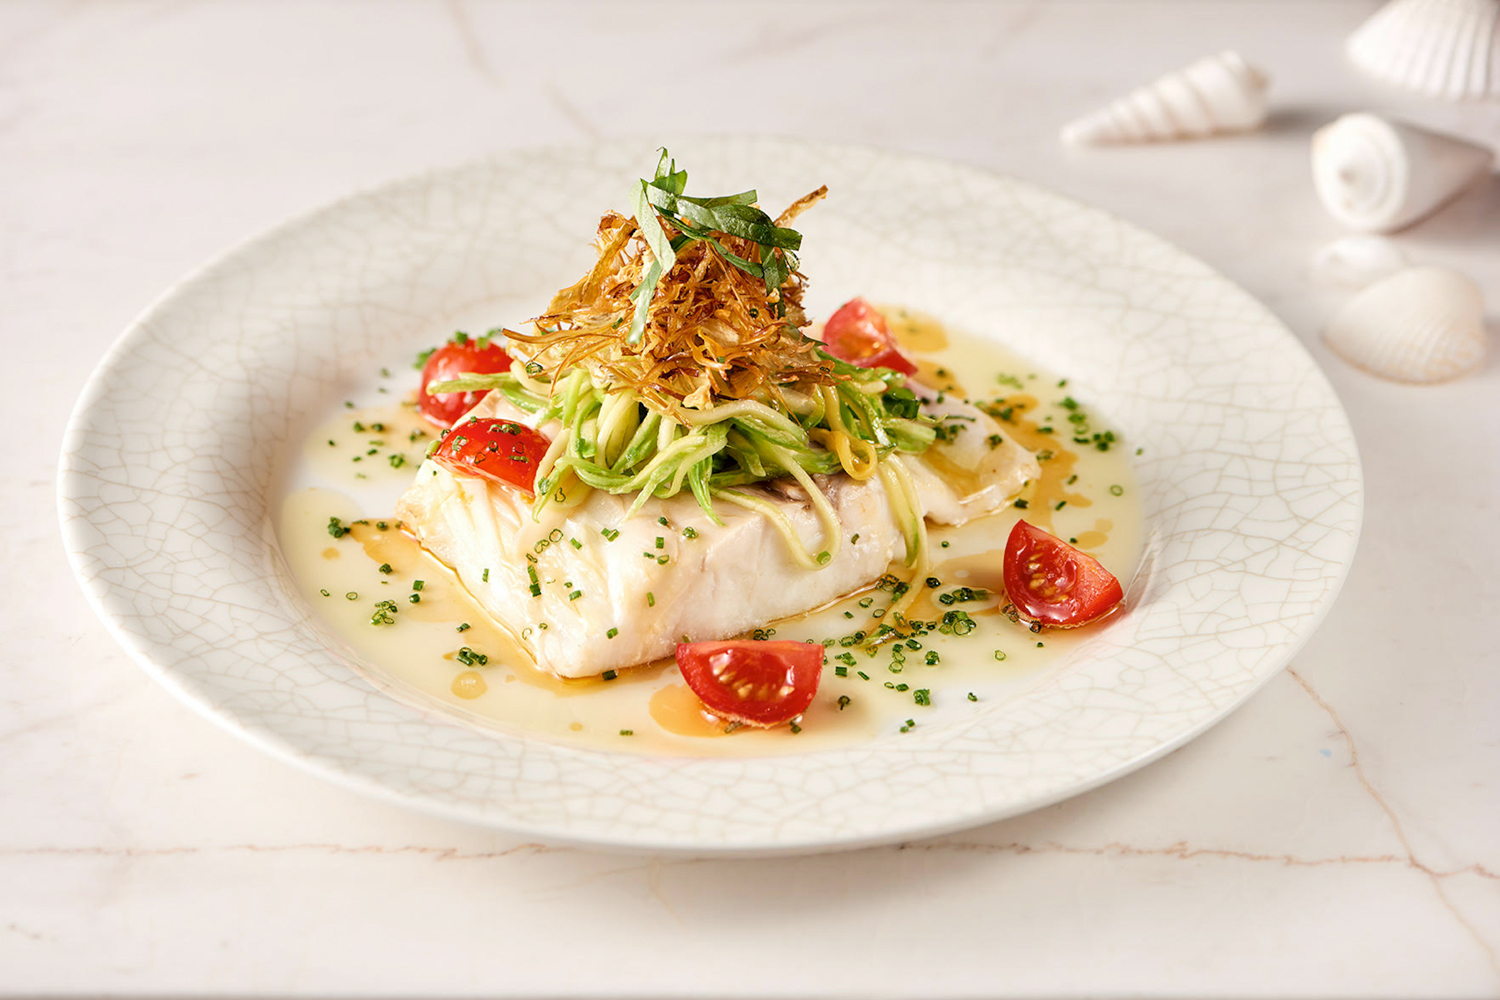 Recipe Lpm Restaurant And Bar’s Salt Baked Sea Bass Restaurants Time In Time Out Abu Dhabi